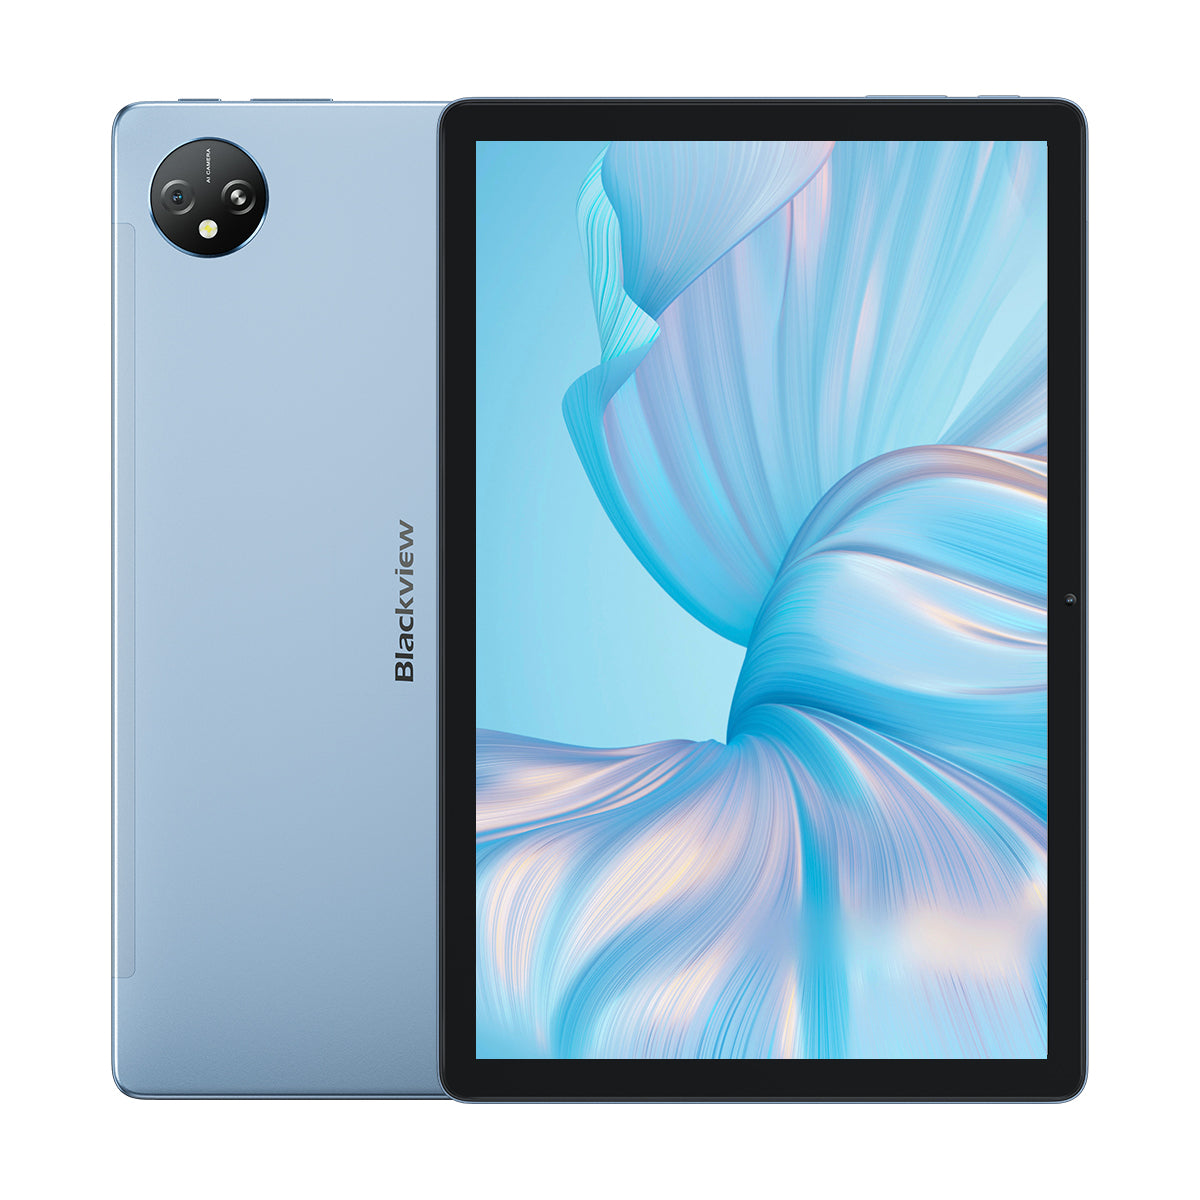 

Blackview Tab 80 4+64/128GB 8+128GB Unisoc T606 7680mAh Widevine L1 Support Android Tablet PC 8GB+128GB / Blue